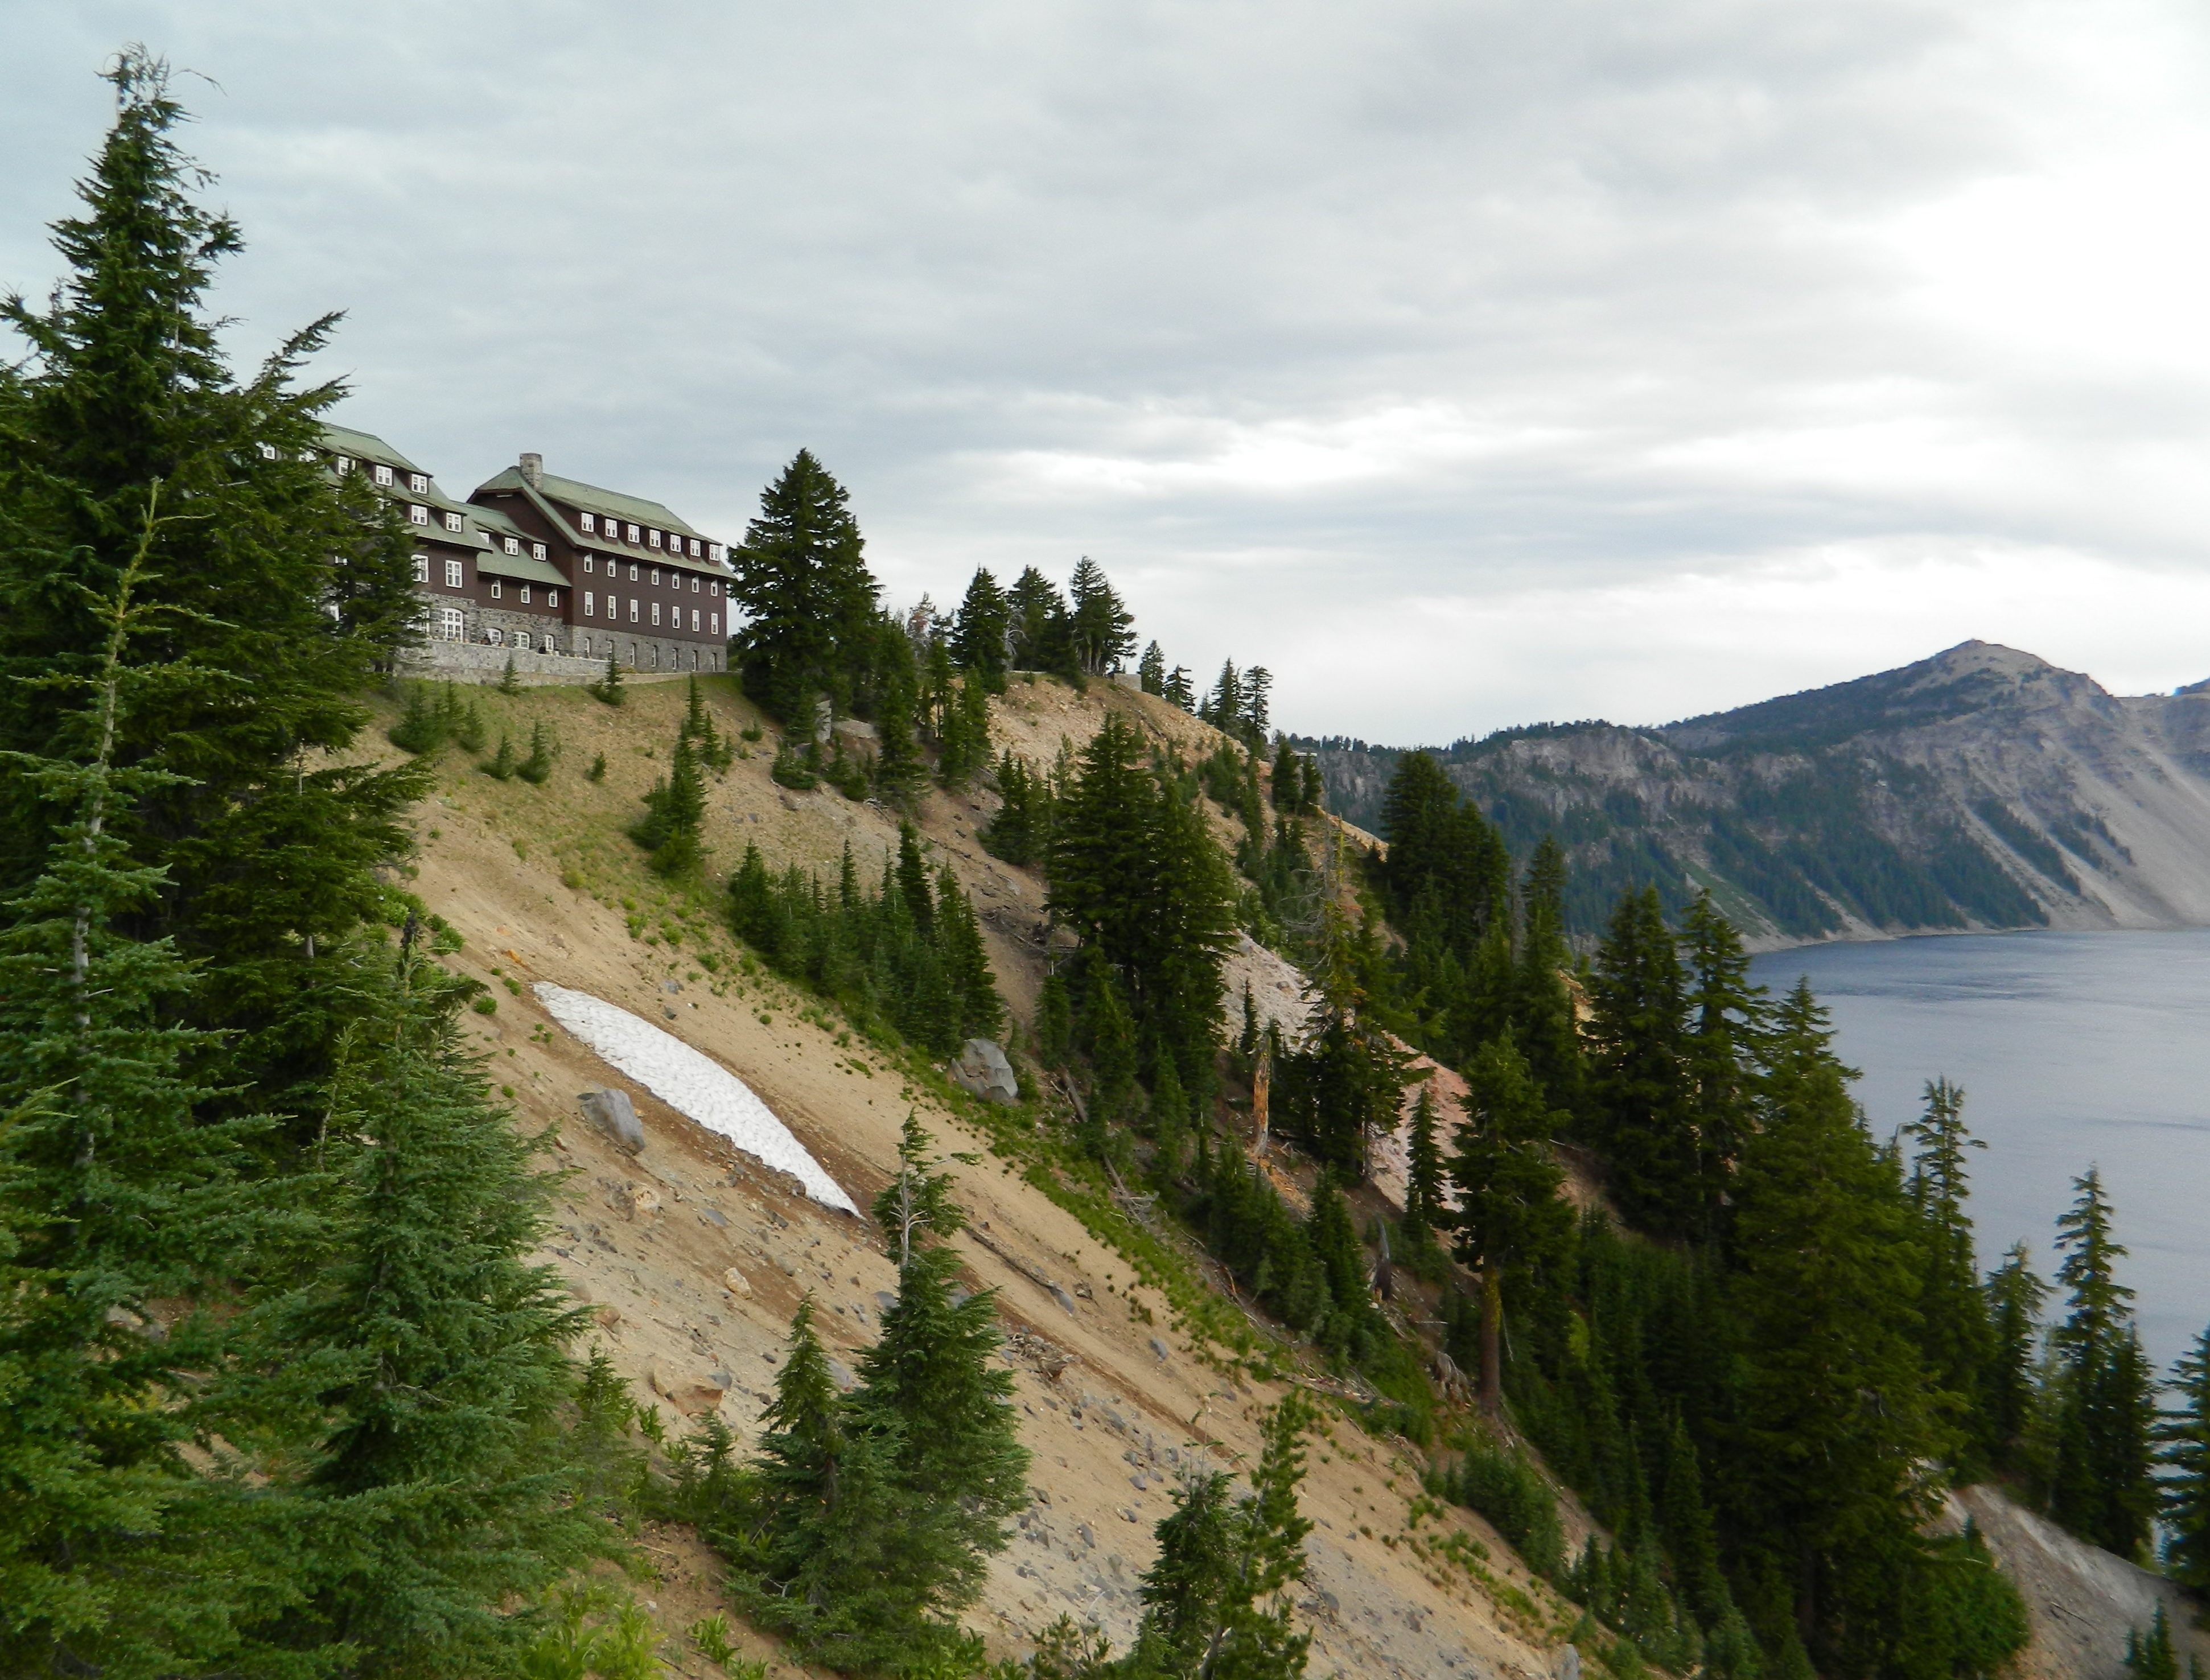 This image shows a sweeping view which includes the southernmost edge of crater lake with a steep, tree-filled slope leading from the lake up to a long, rustic four-story lodge. The first floor is clad in stone and the upper floors are wood-clad and painted deep brown. The pitched, shingled roof is a pale green.